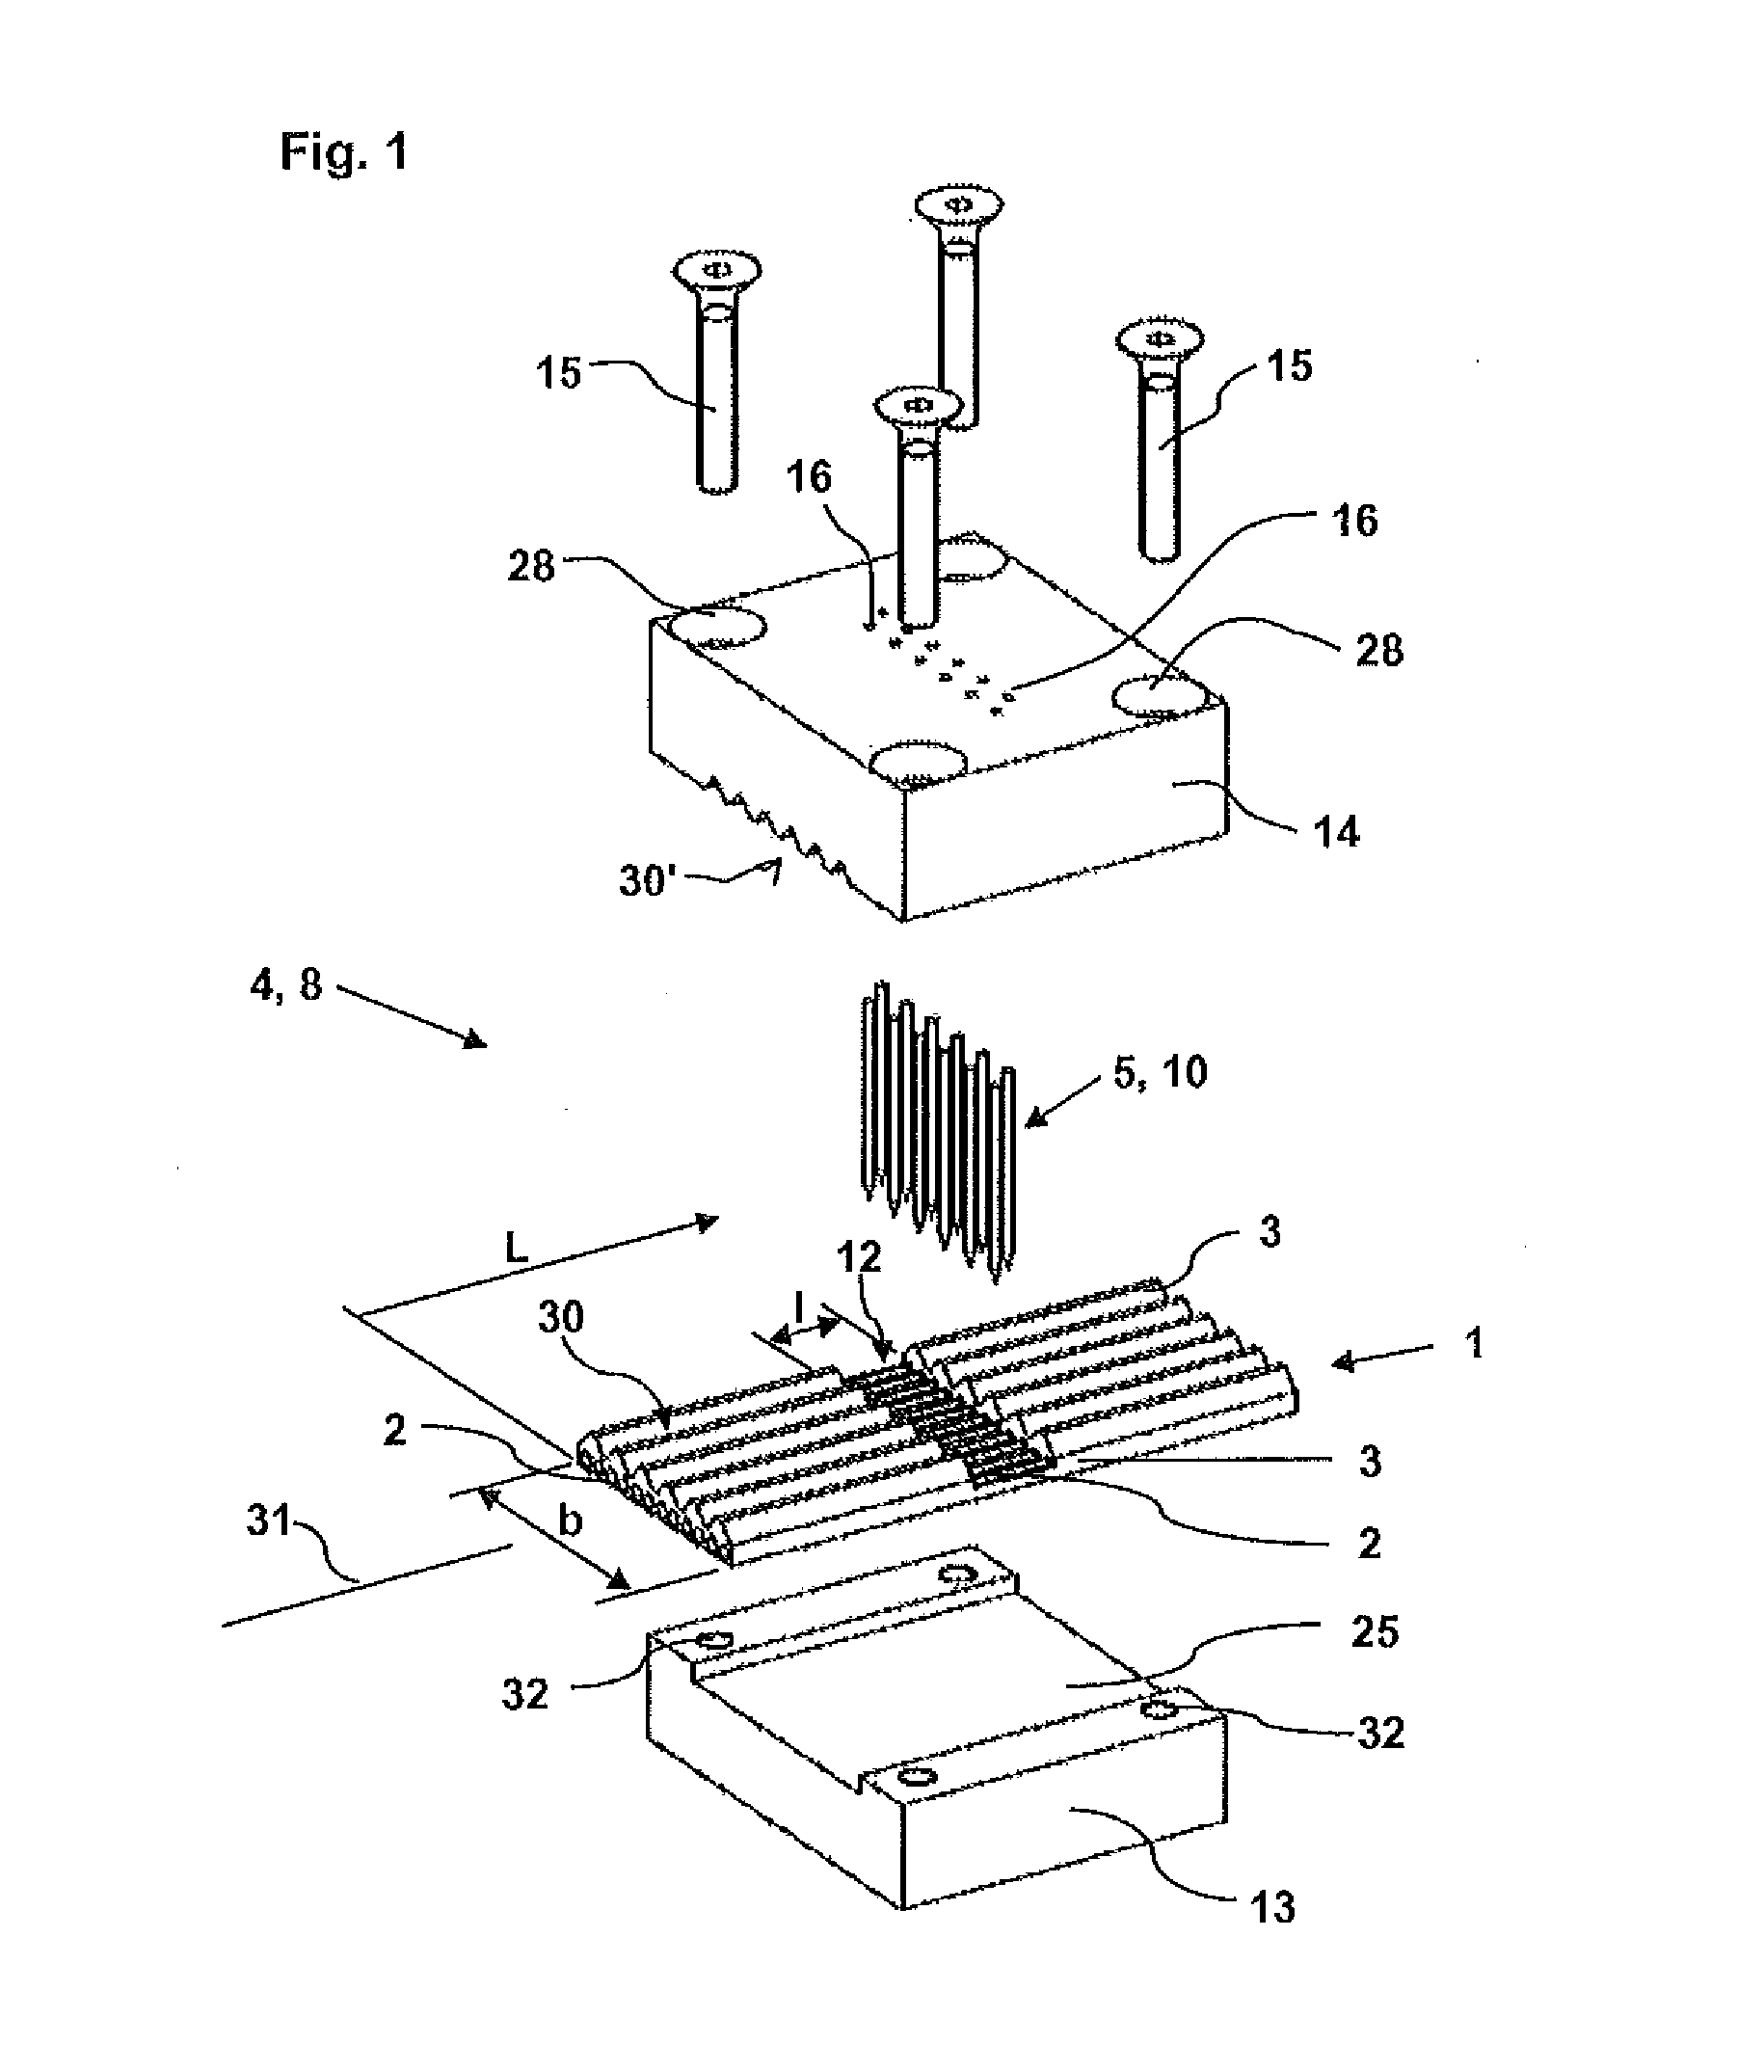 Load supporting belt